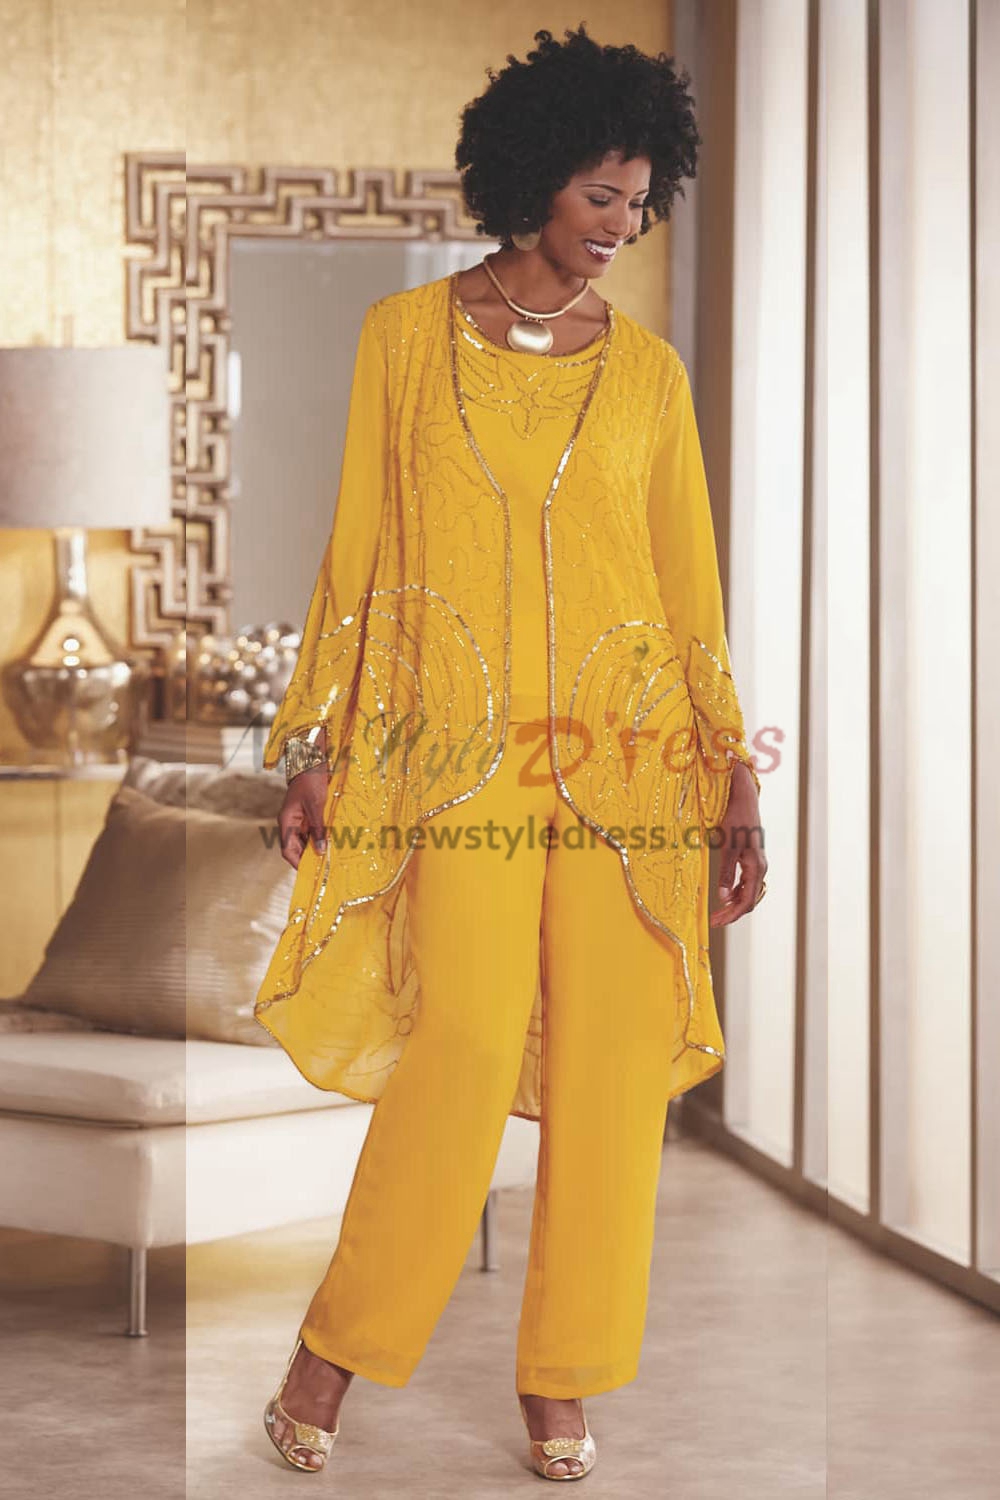 Gold Yellow Beaded Trousers outfit Mother of the bride pant suit Wear ...